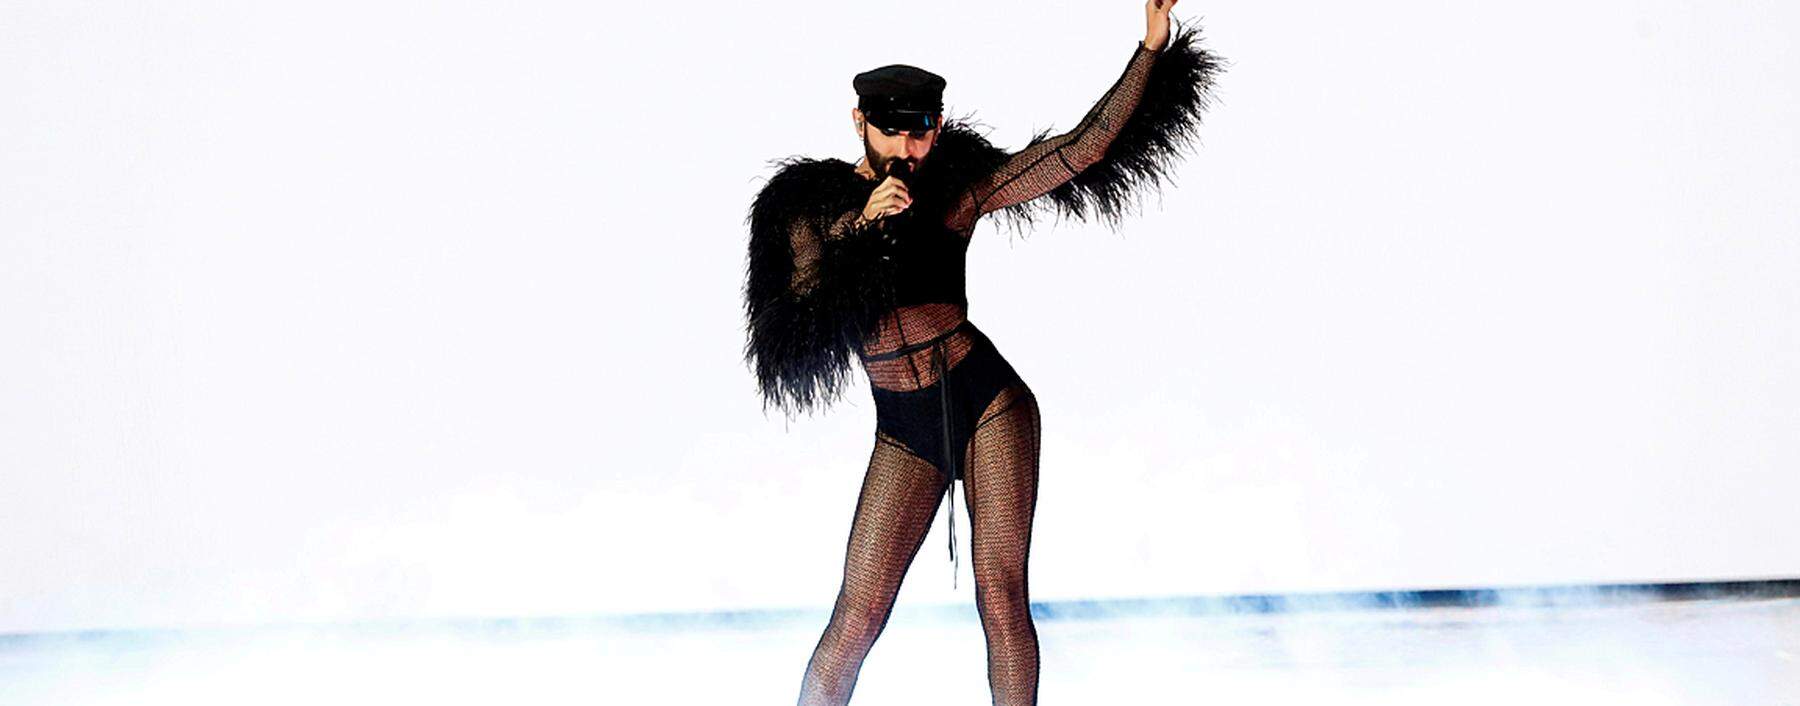 Conchita Wurst performs during the Grand Final of the 2019 Eurovision Song Contest in Tel Aviv, Israel